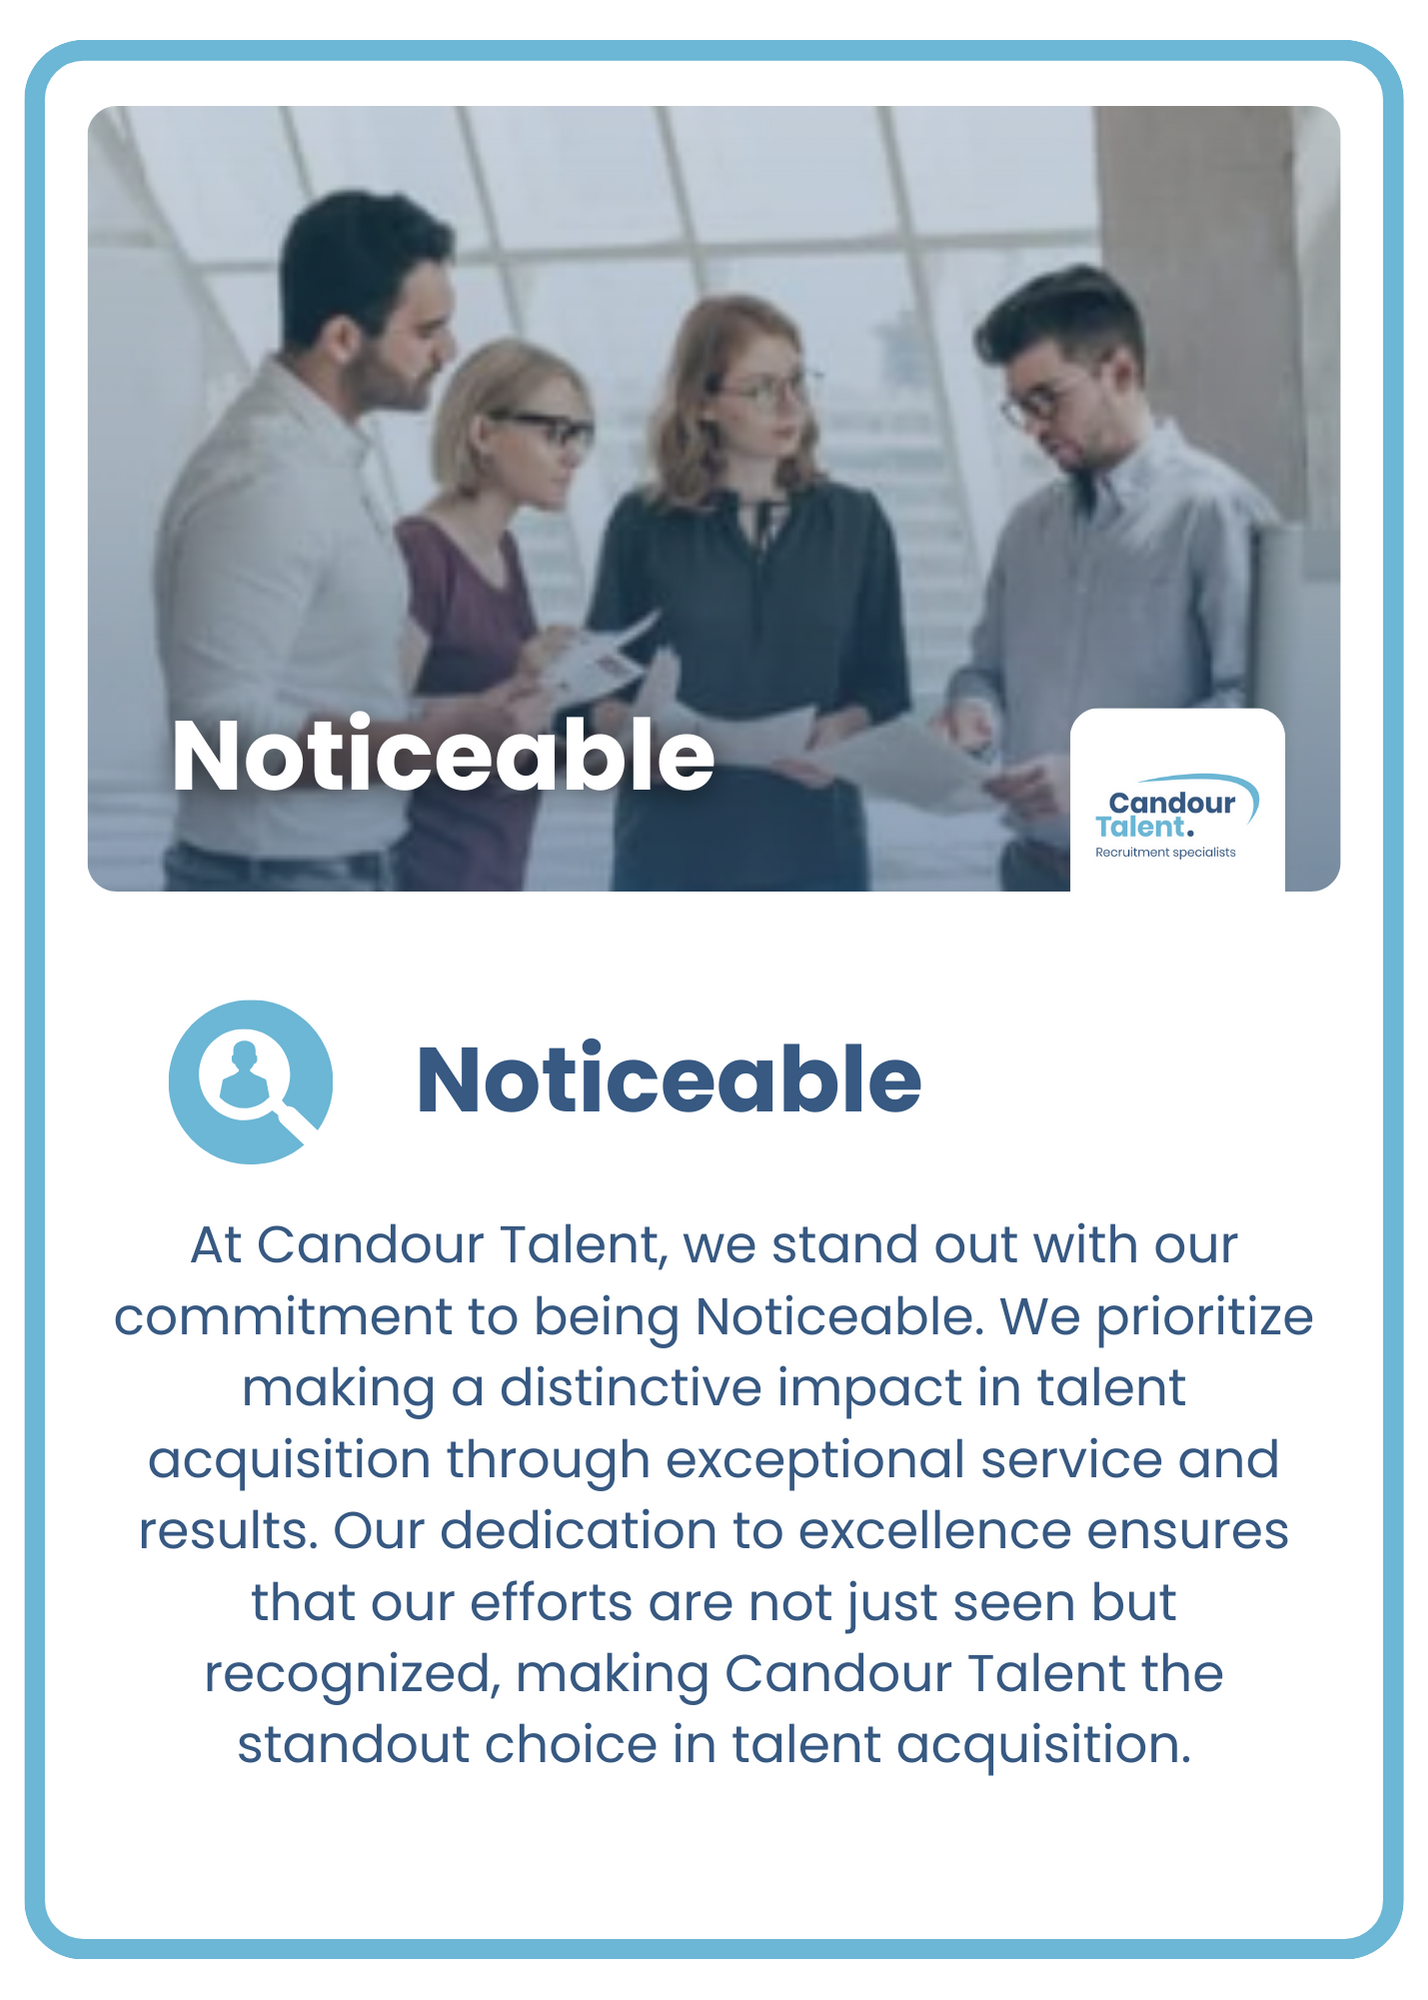 Candour Talent Recruitment Agency - Our Values page - our values of Noticeable. Text: At Candour Talent, we stand out with our commitment to being Noticeable. We prioritise making a distinctive impact in talent acquisition through exceptional service and results. Our dedication to excellence ensures that our efforts are not just seen but recognised, making Candour Talent the standout choice in talent acquisition.